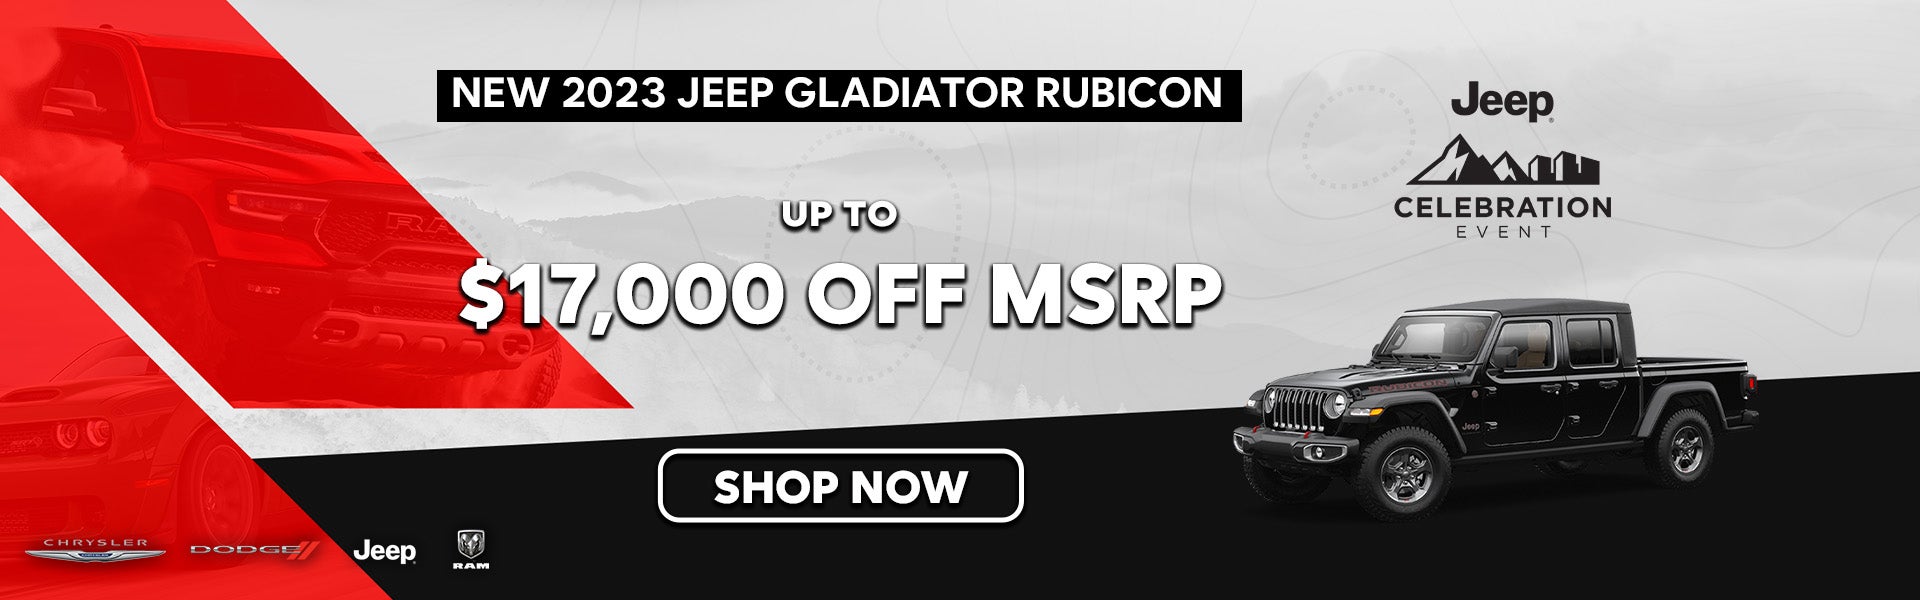 New 2023 Jeep Gladiator Rubicon Special Offer